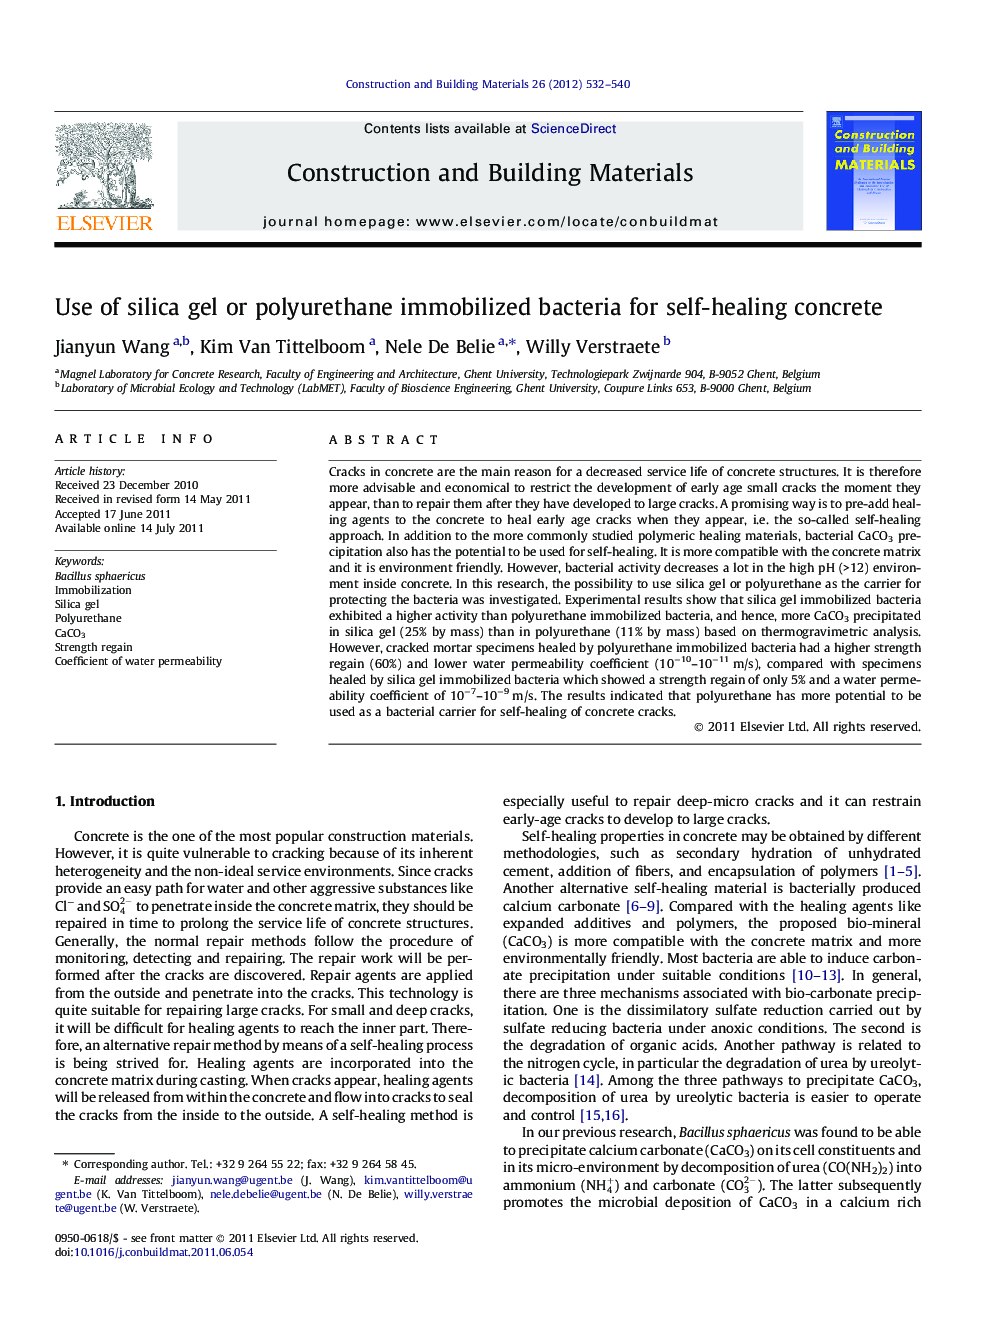 Use of silica gel or polyurethane immobilized bacteria for self-healing concrete